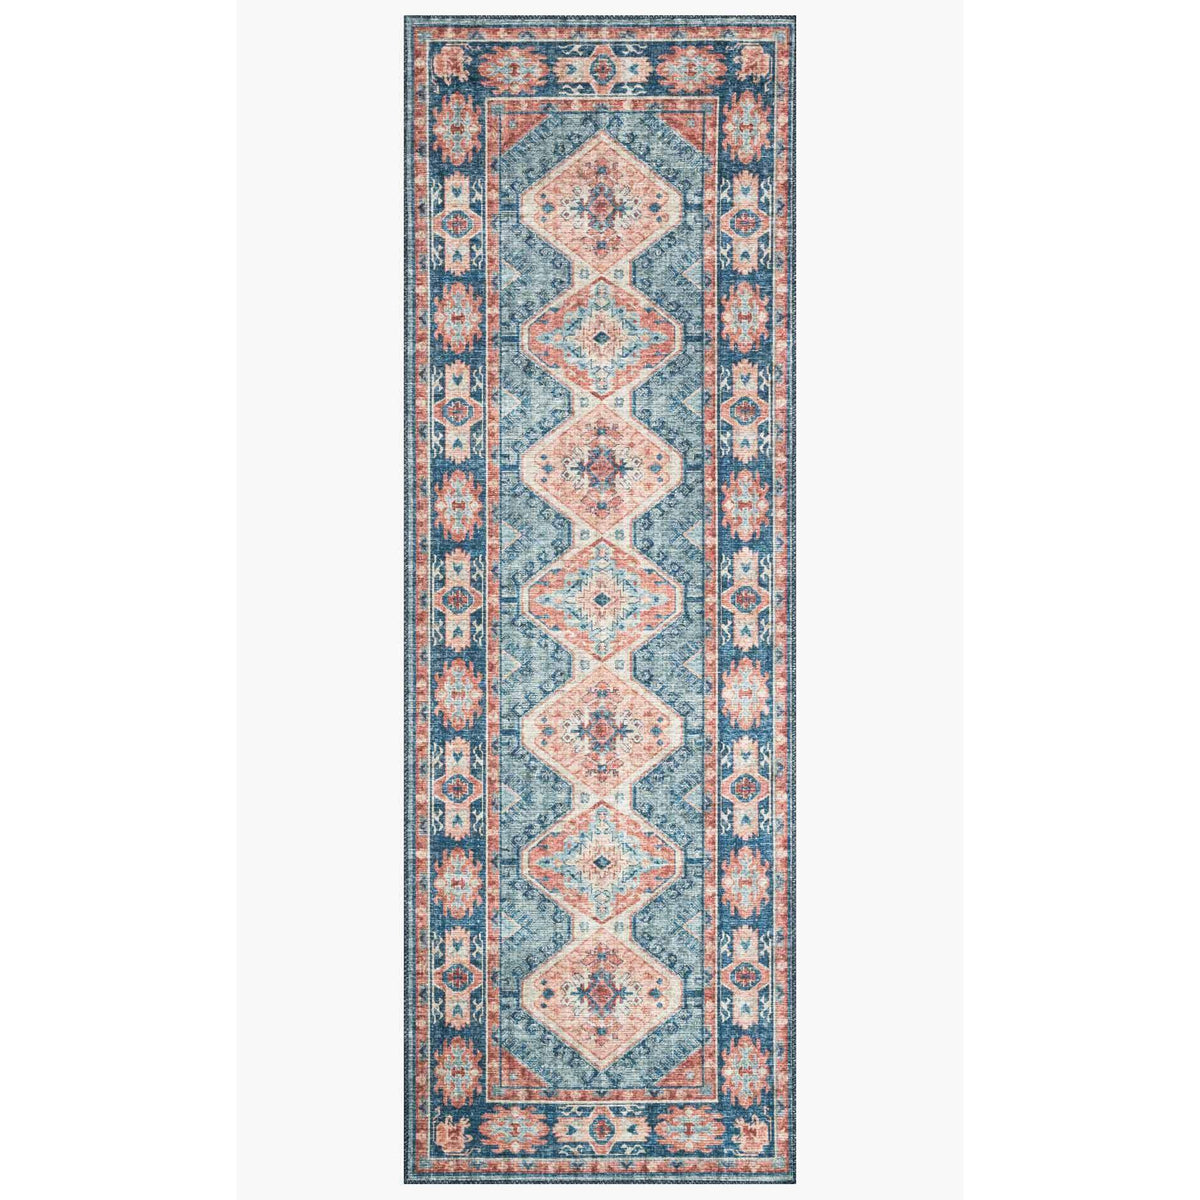 Skye Rug Collection by Loloi -Sky 03 Turquoise/Terracotta-Loloi Rugs-Blue Hand Home